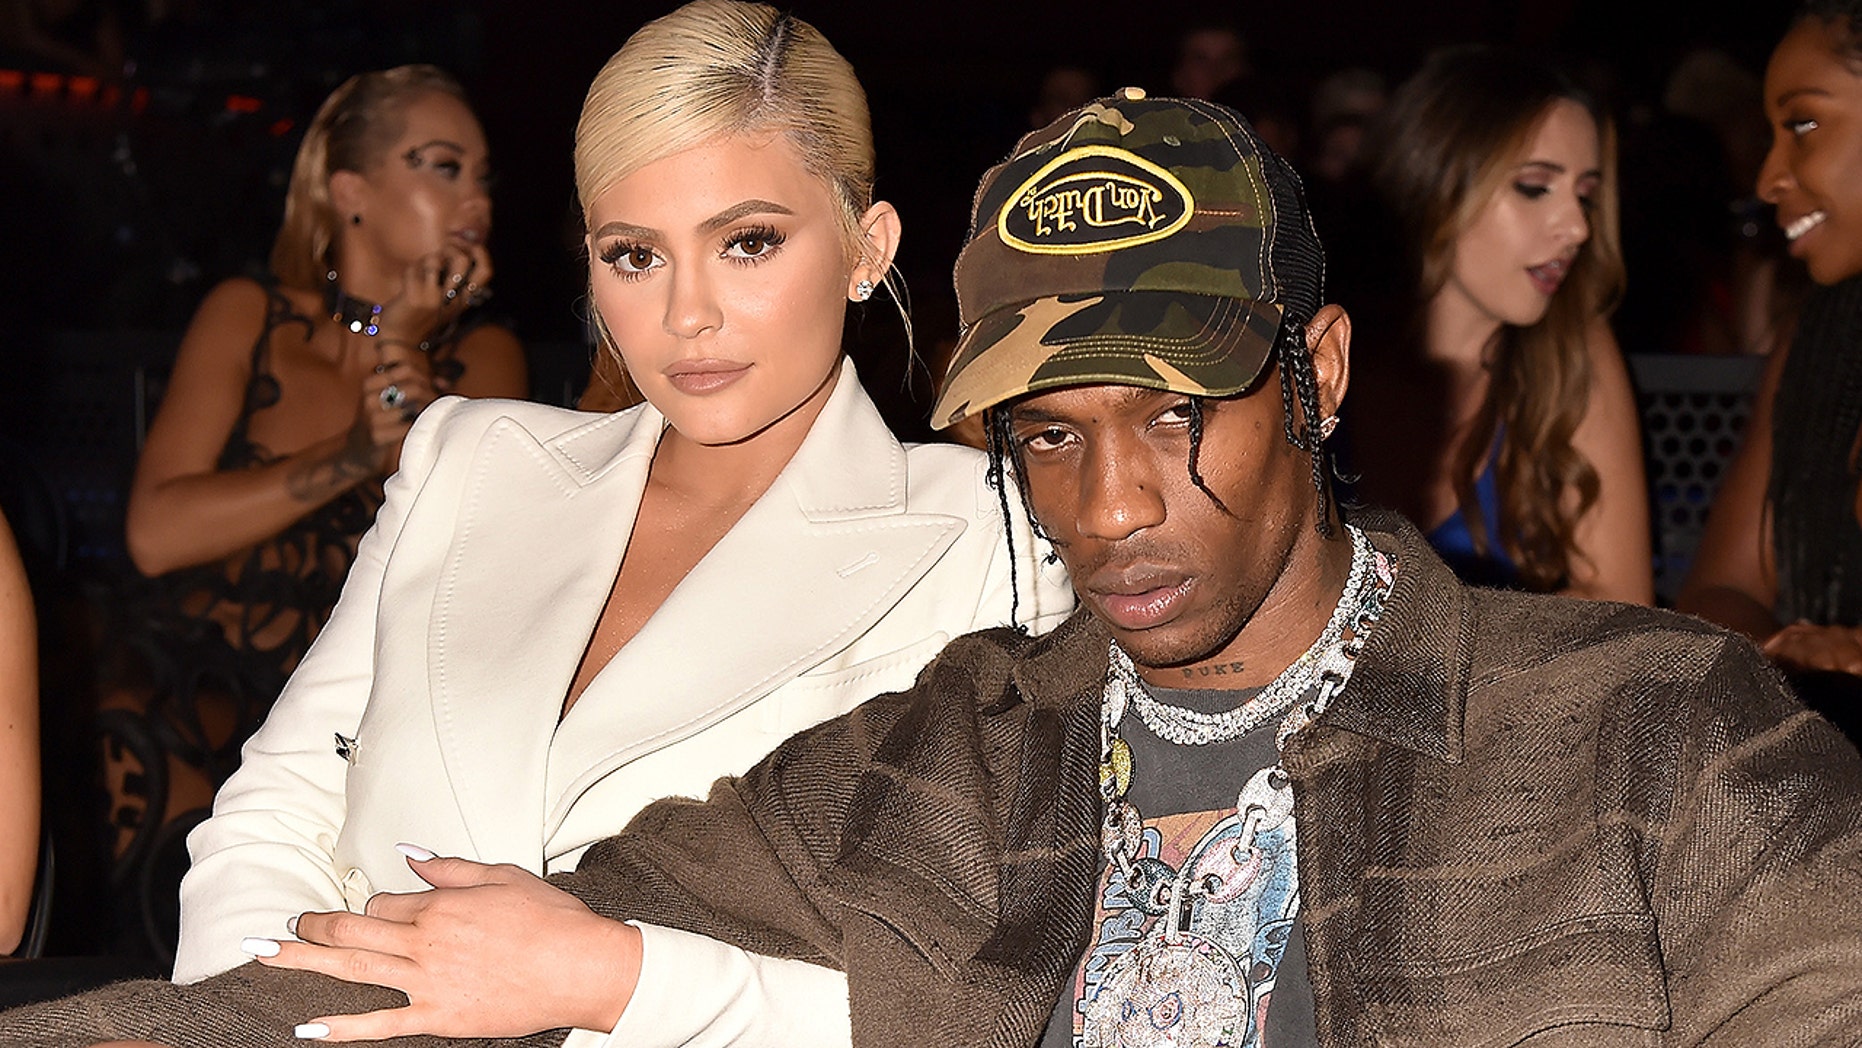 Kylie Jenner shares video of daughter Stormi watching Travis Scott at Super Bowl Halftime Show